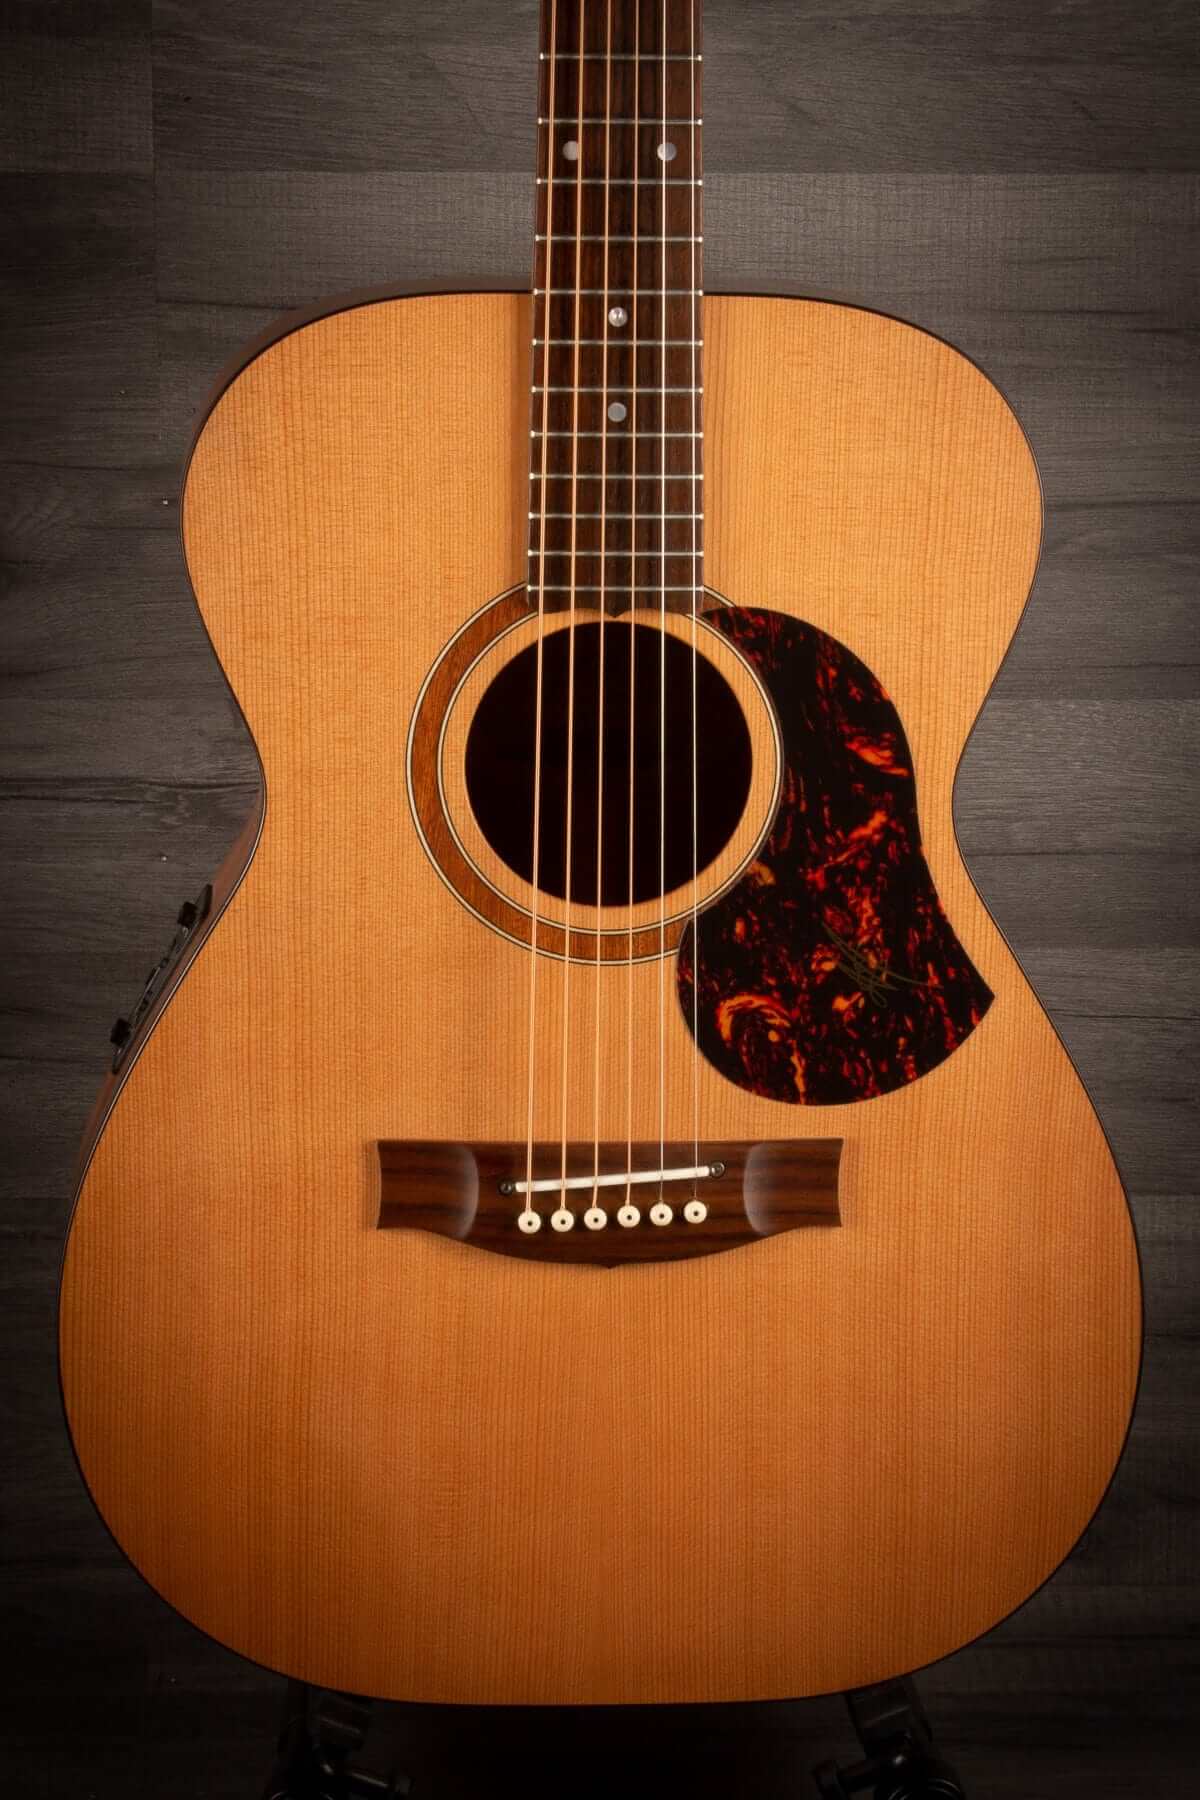 Maton Acoustic Guitar USED - Maton SRS808 Acoustic Guitar With AP5 Pro Pickup System